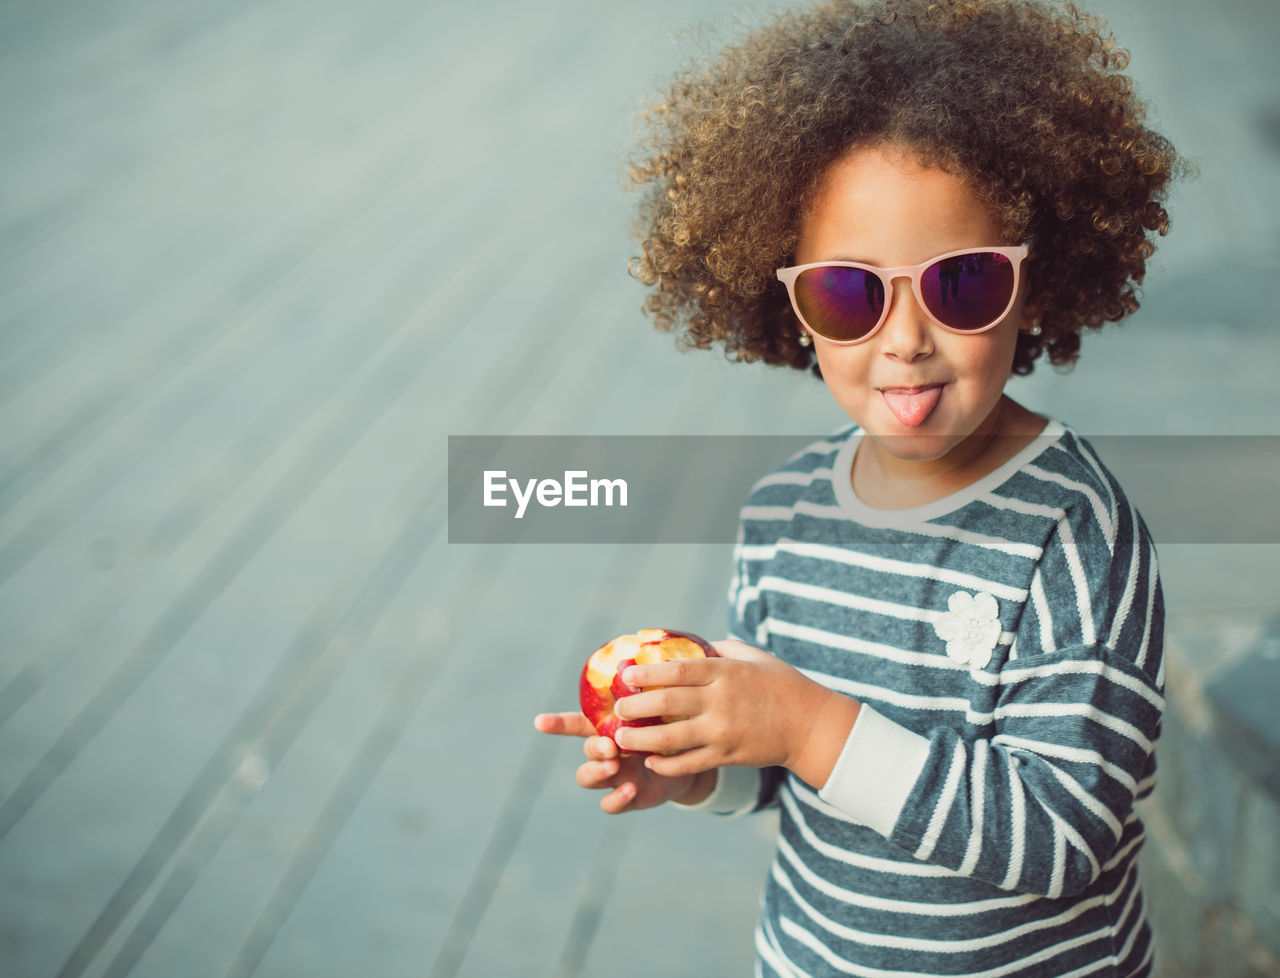 Cute little ethnic girl with afro hair wearing stylish striped shirt and sunglasses smiling and showing tongue while standing on city street and eating apple